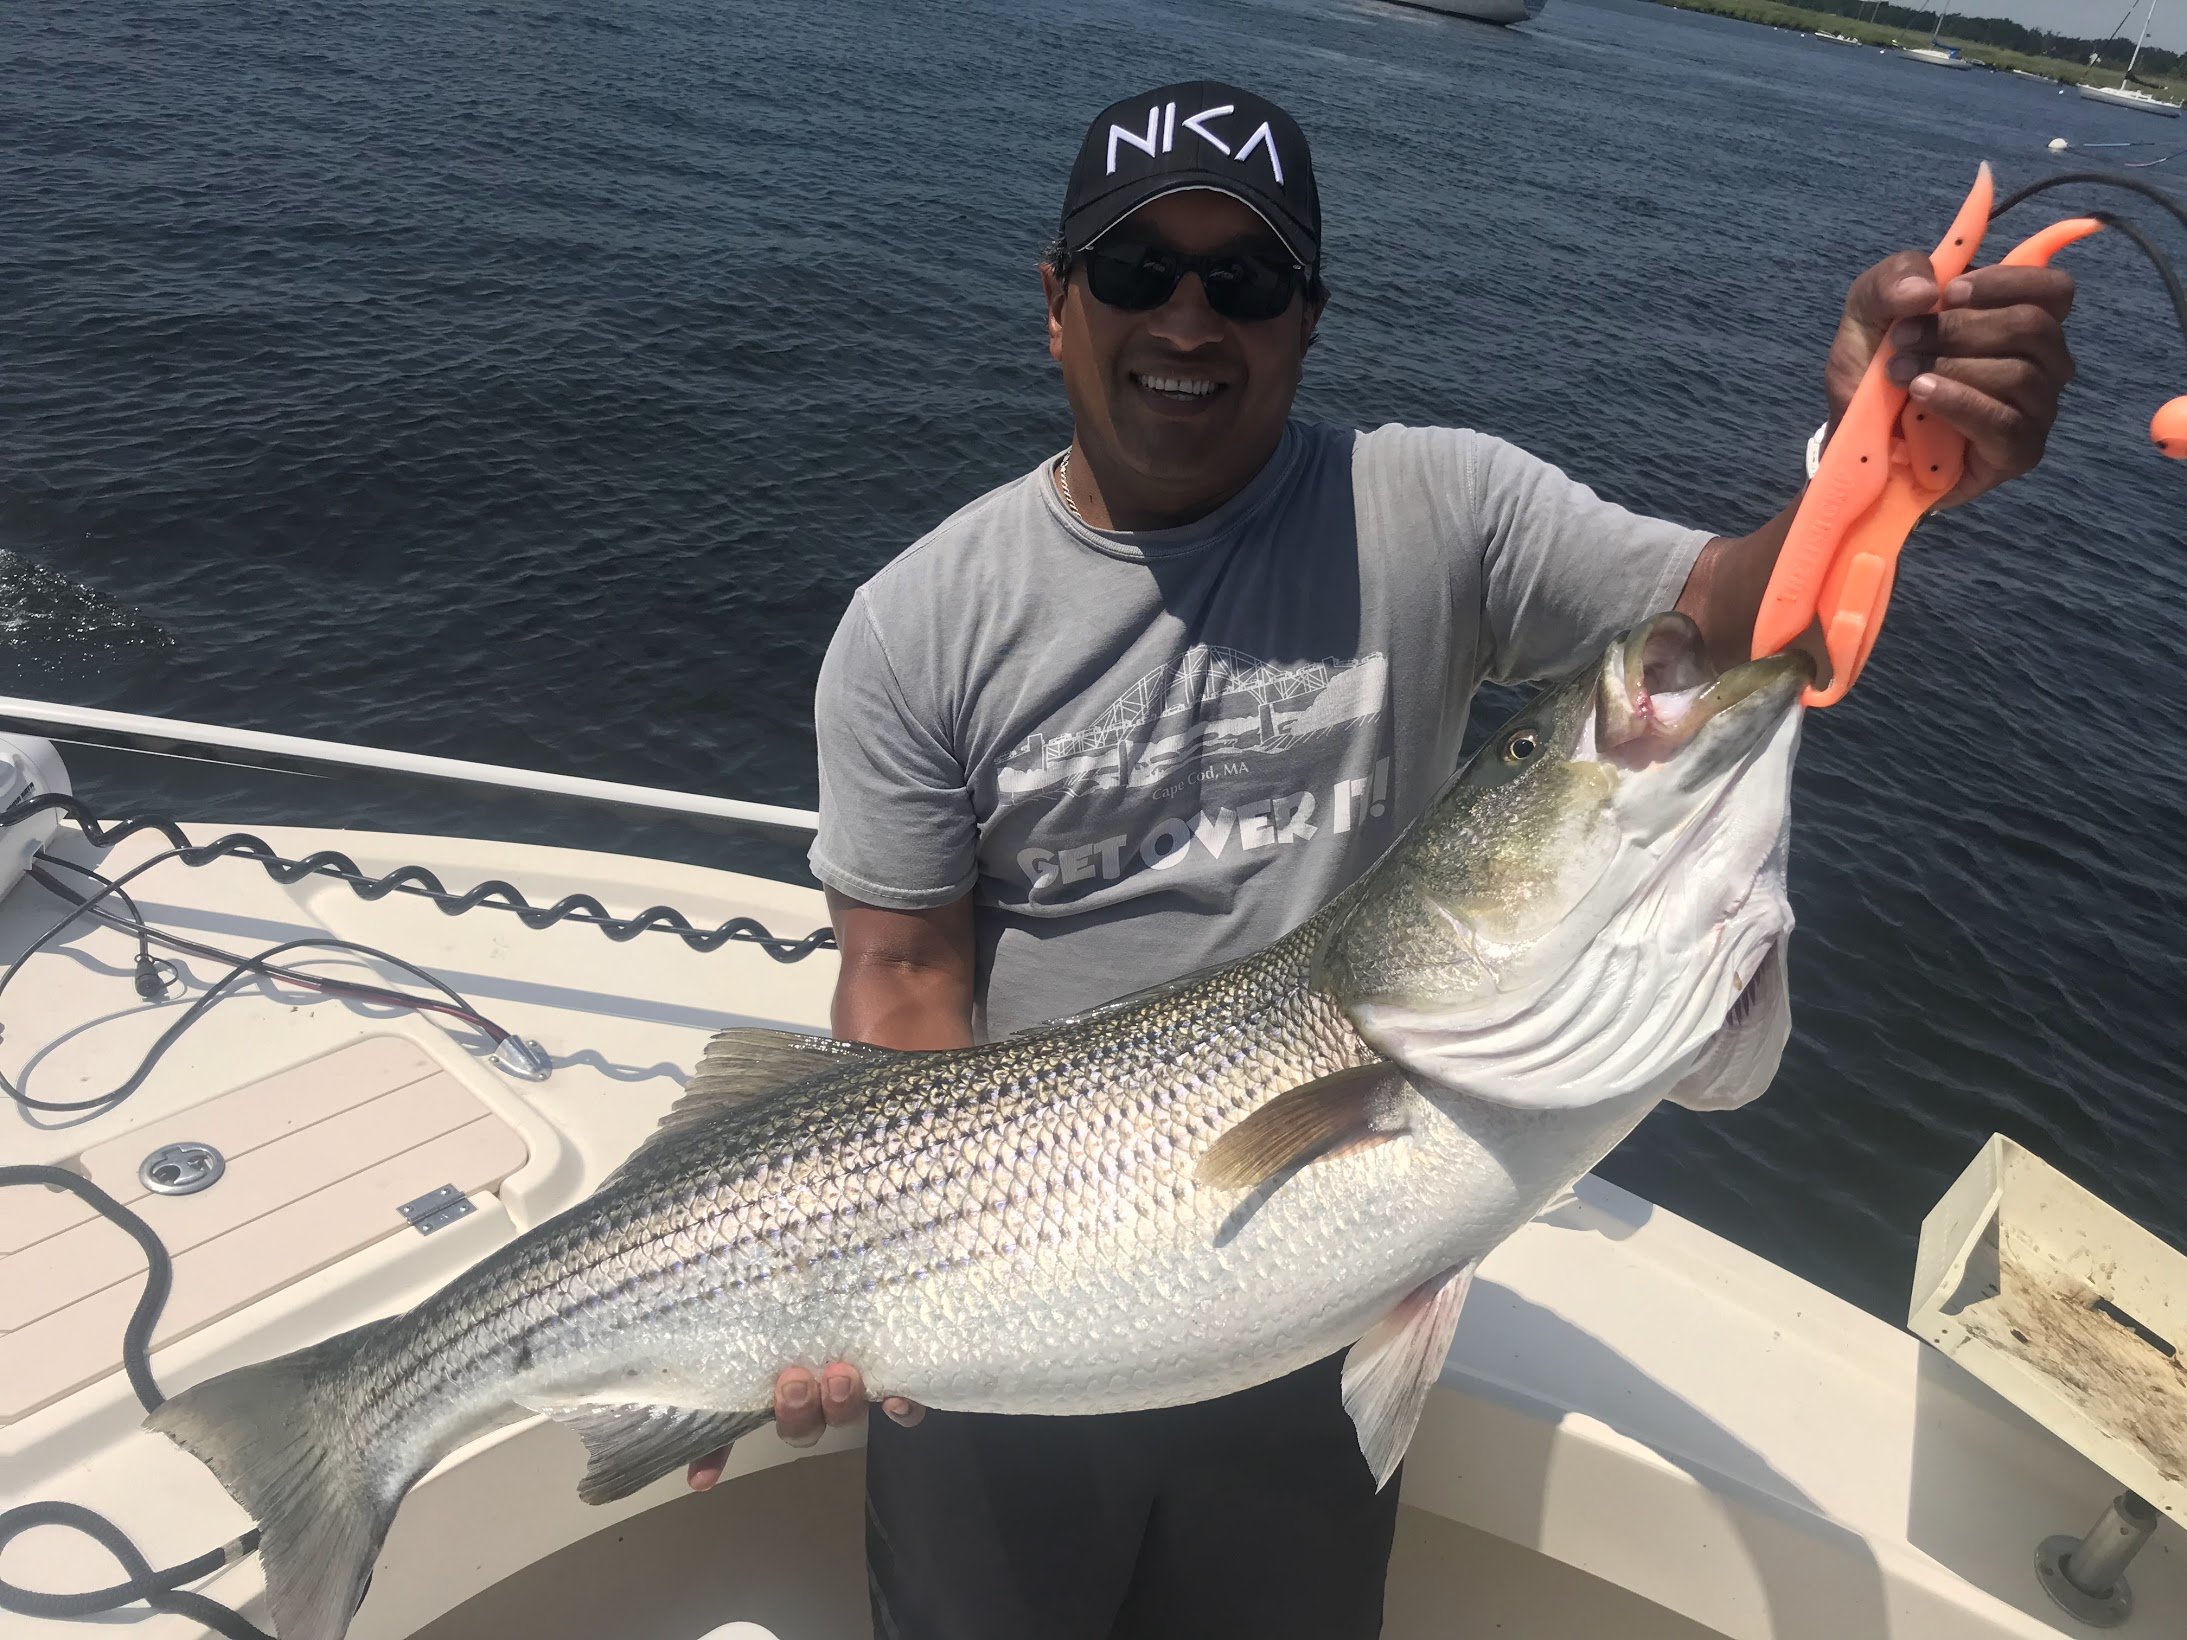 How much backing for your fishing reel? — Mouths of the Merrimack